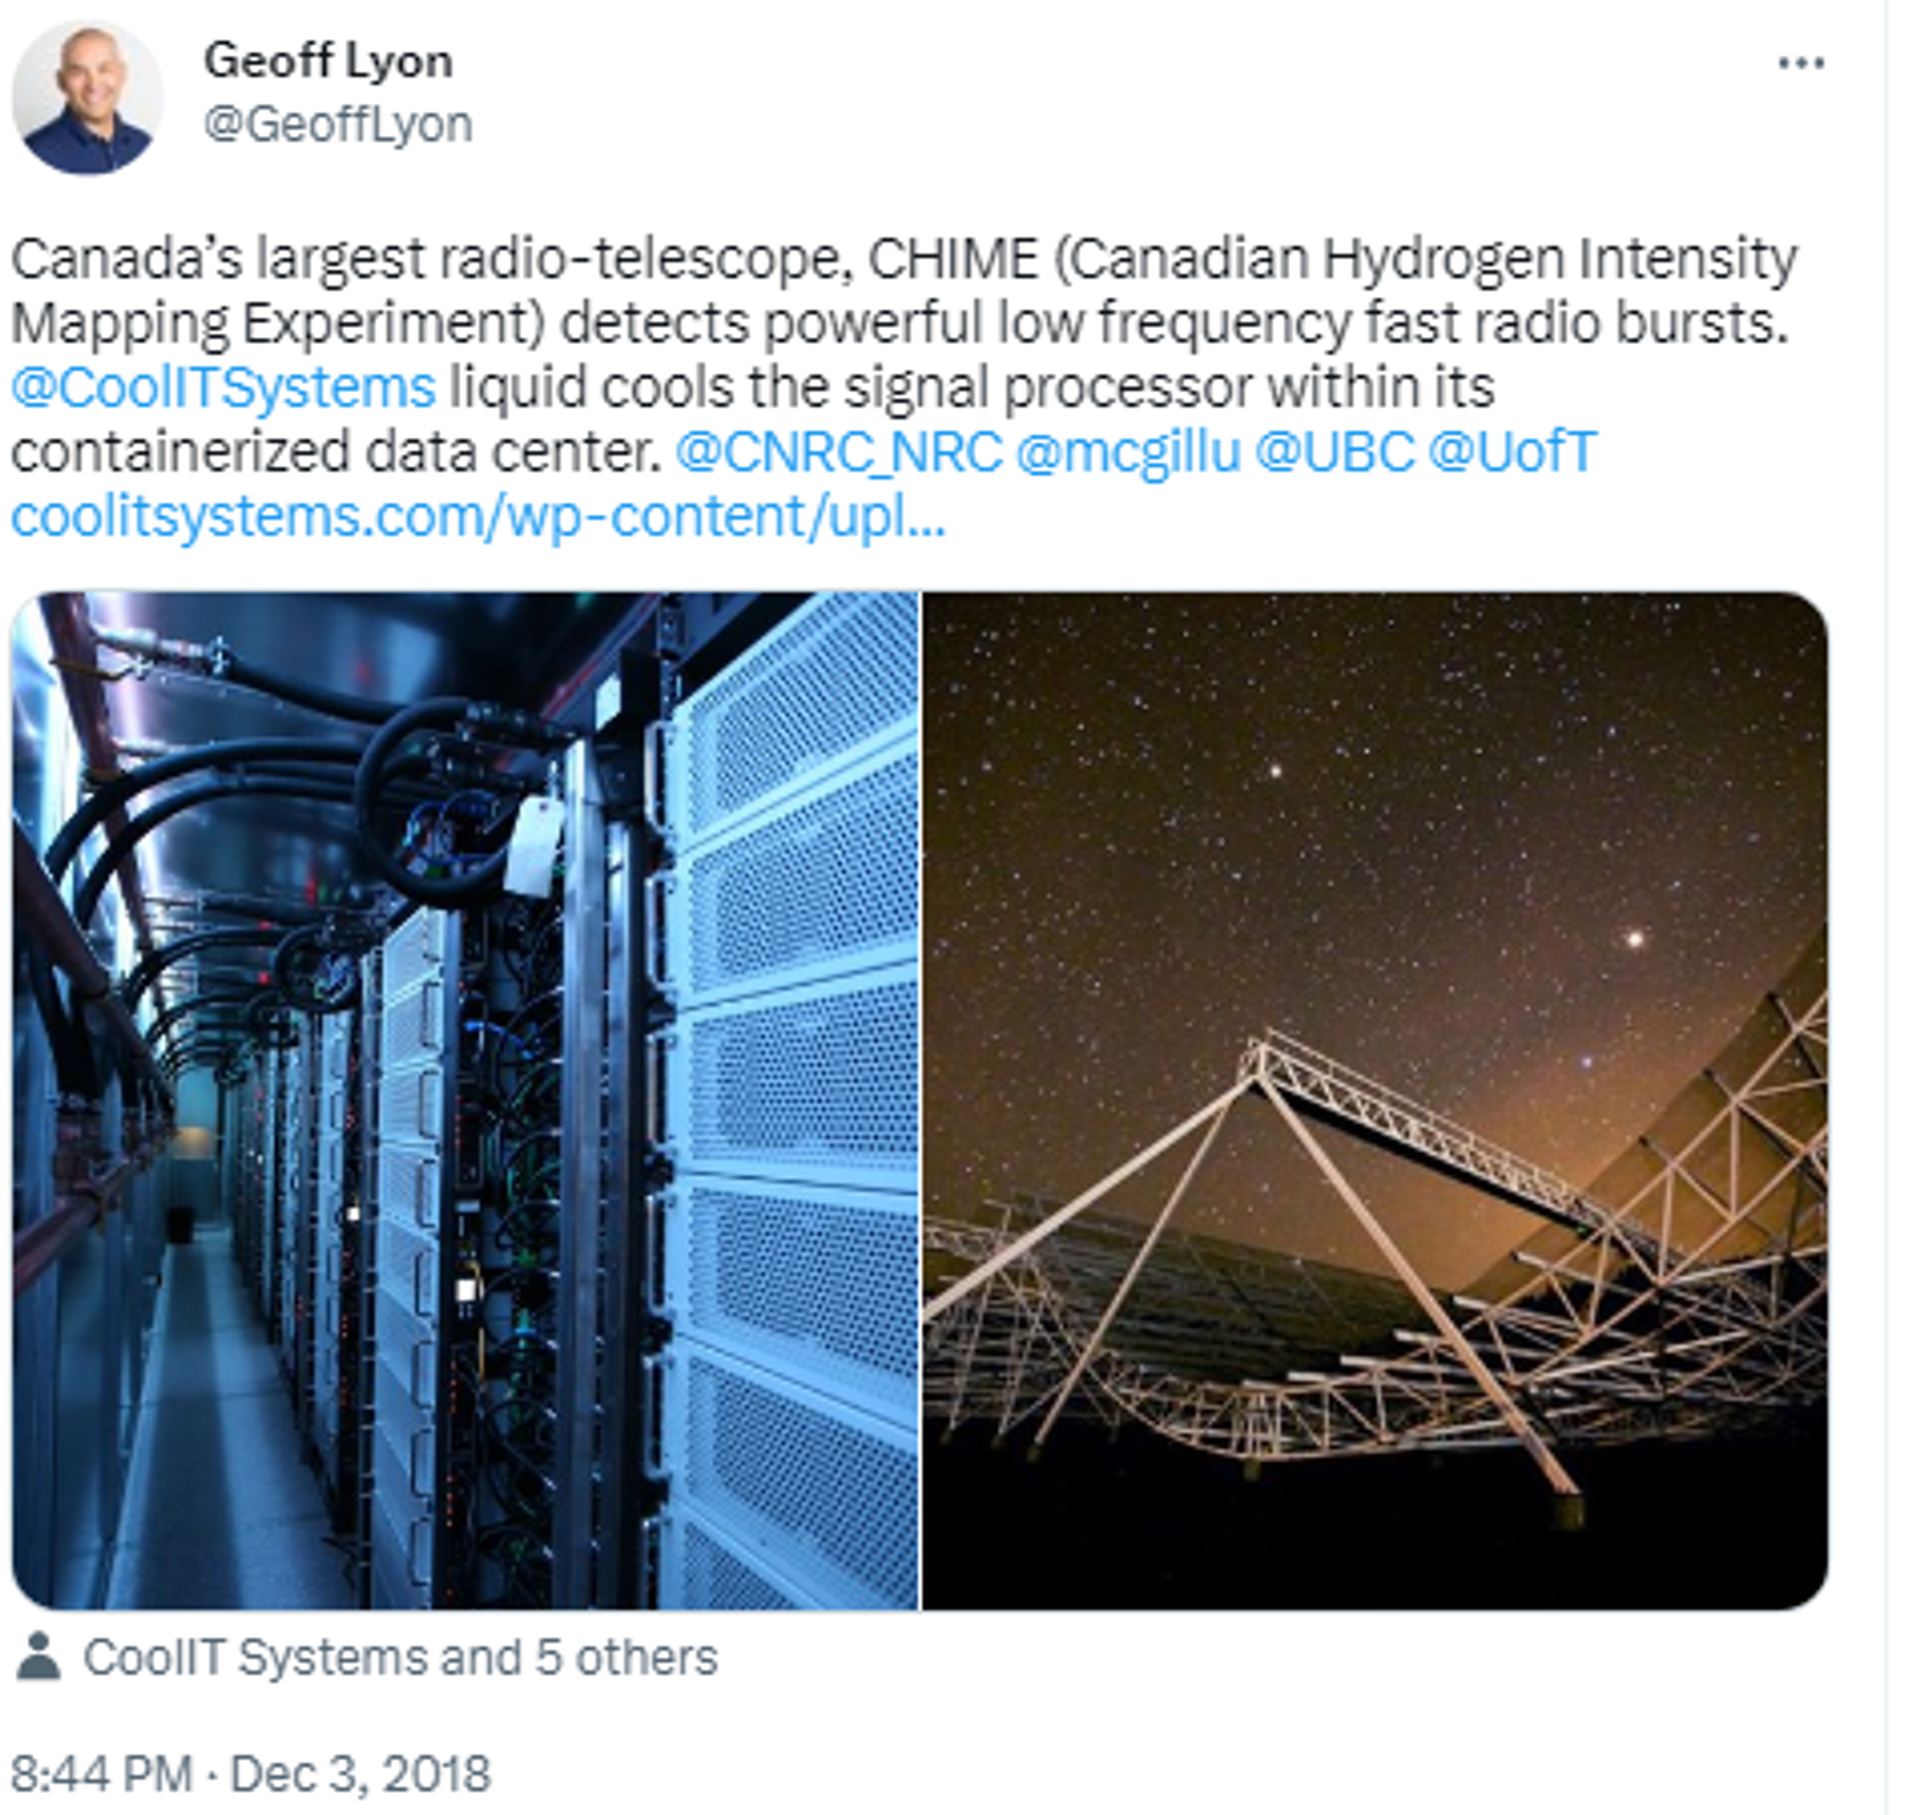 Twitter Screenshot showing the large stationary telescope in British Columbia, the Canadian Hydrogen Intensity Mapping Experiment, known as CHIME. - Sputnik International, 1920, 28.04.2023